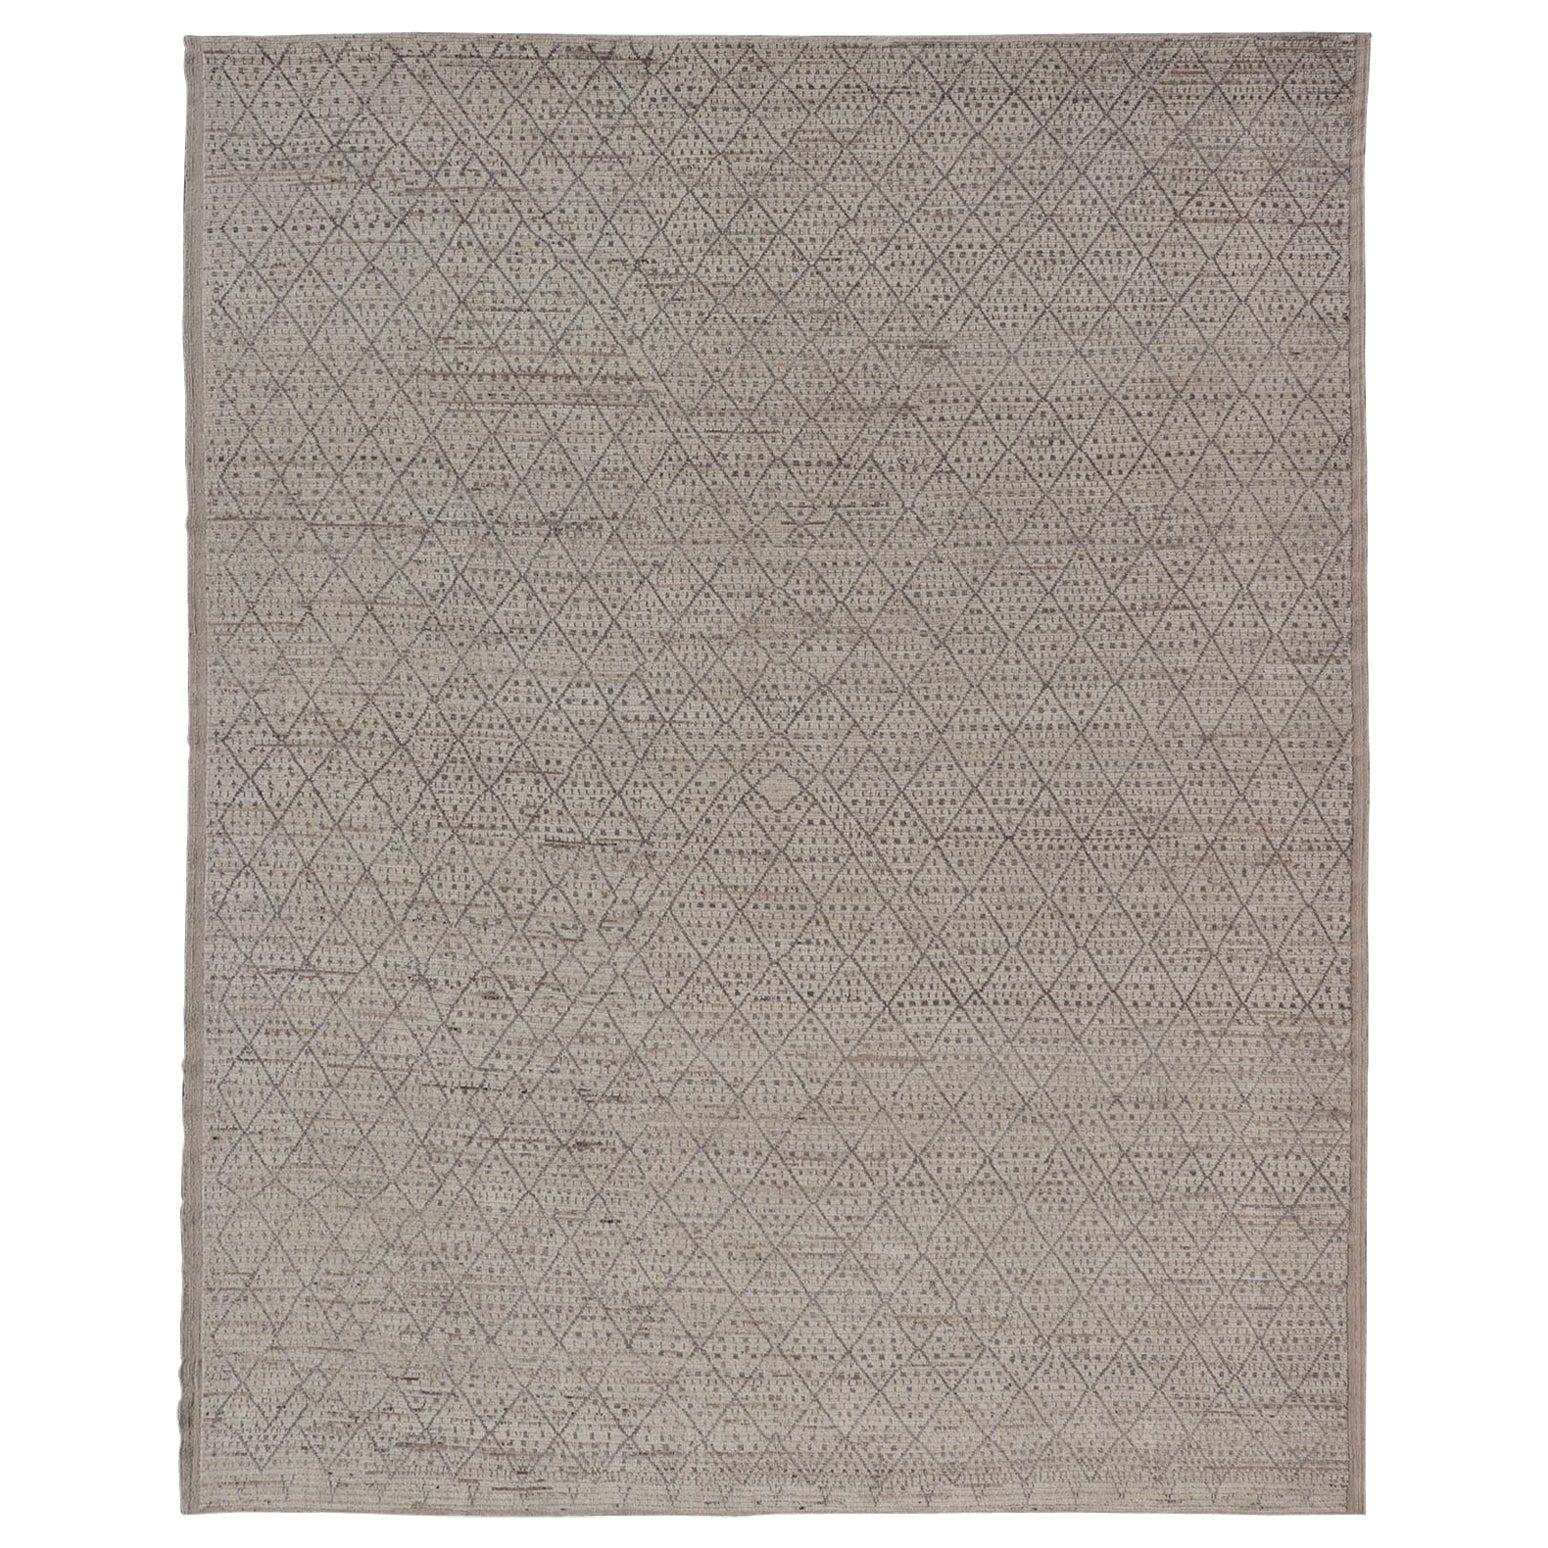 Modern Moroccan Type Rug in Wool with All-Over Diamond Design in Earthy Tones For Sale